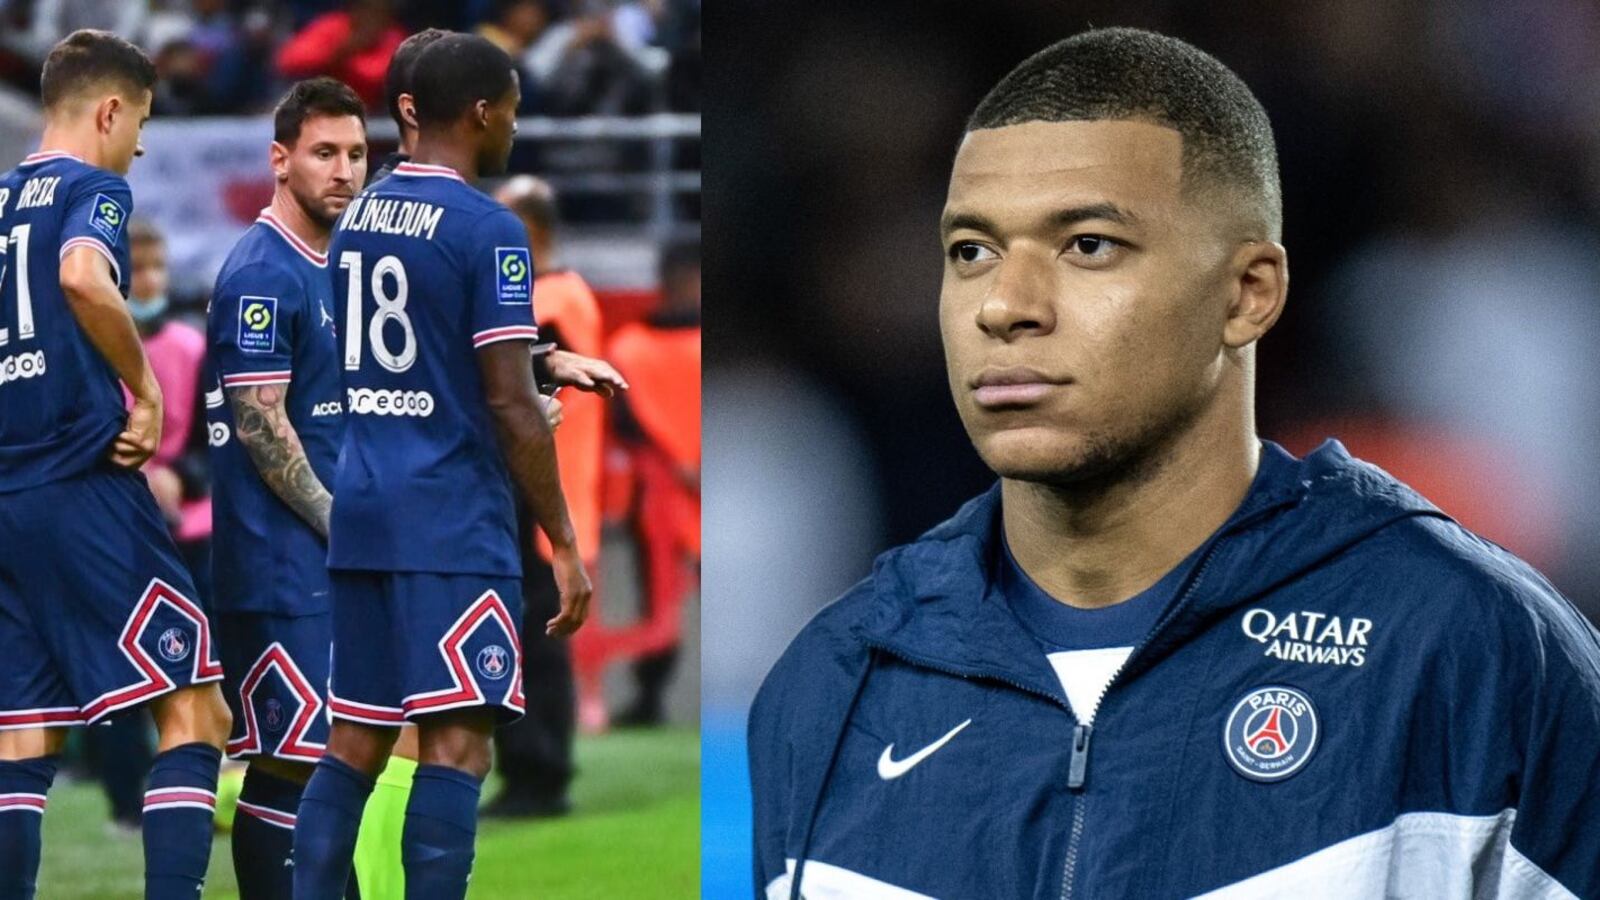 He's Mbappe's best friend, but now he would betray him and leave PSG to go to Real Madrid